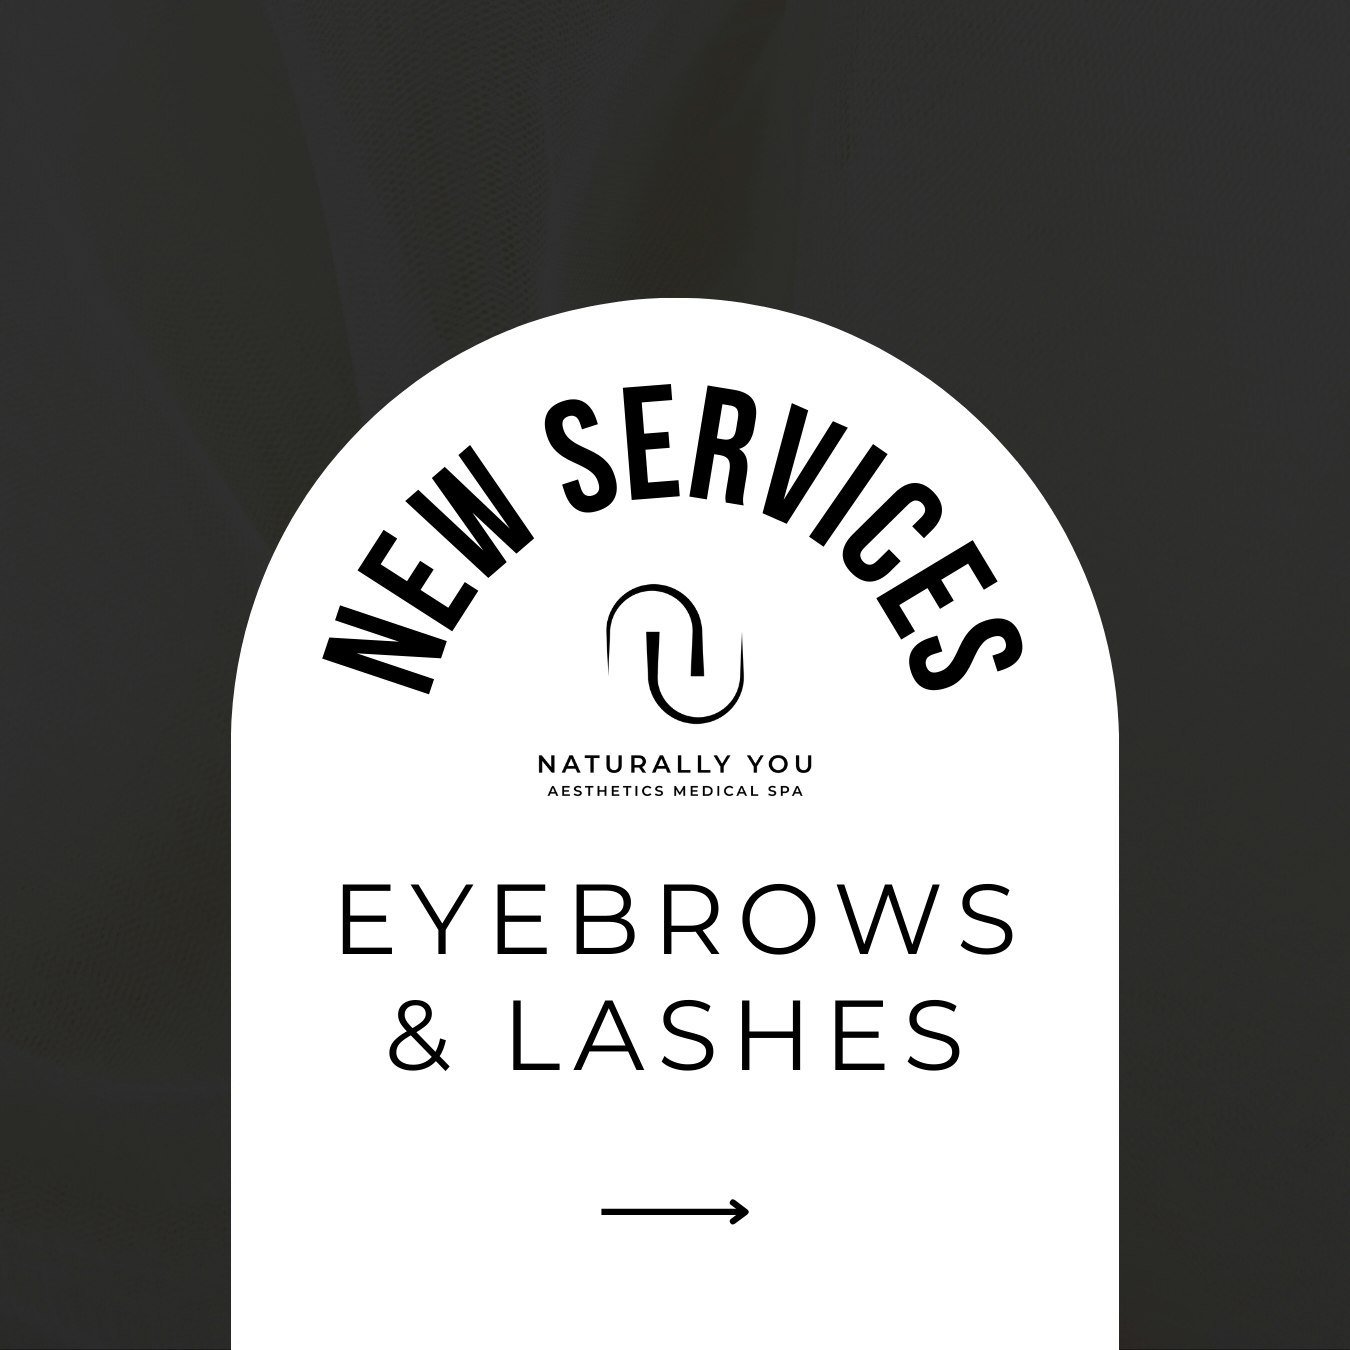 The benefits of our new brow + lash services! ✨ 

✦ Eyebrows ✦
A thicker &amp; fuller look
Reshape &amp; contour
Fill in sparse areas
Frame your face

✦ Lashes ✦
A darker &amp; lifted look
No more mascara
Enhance your natural lashes

✦ Both ✦
Pain-fr